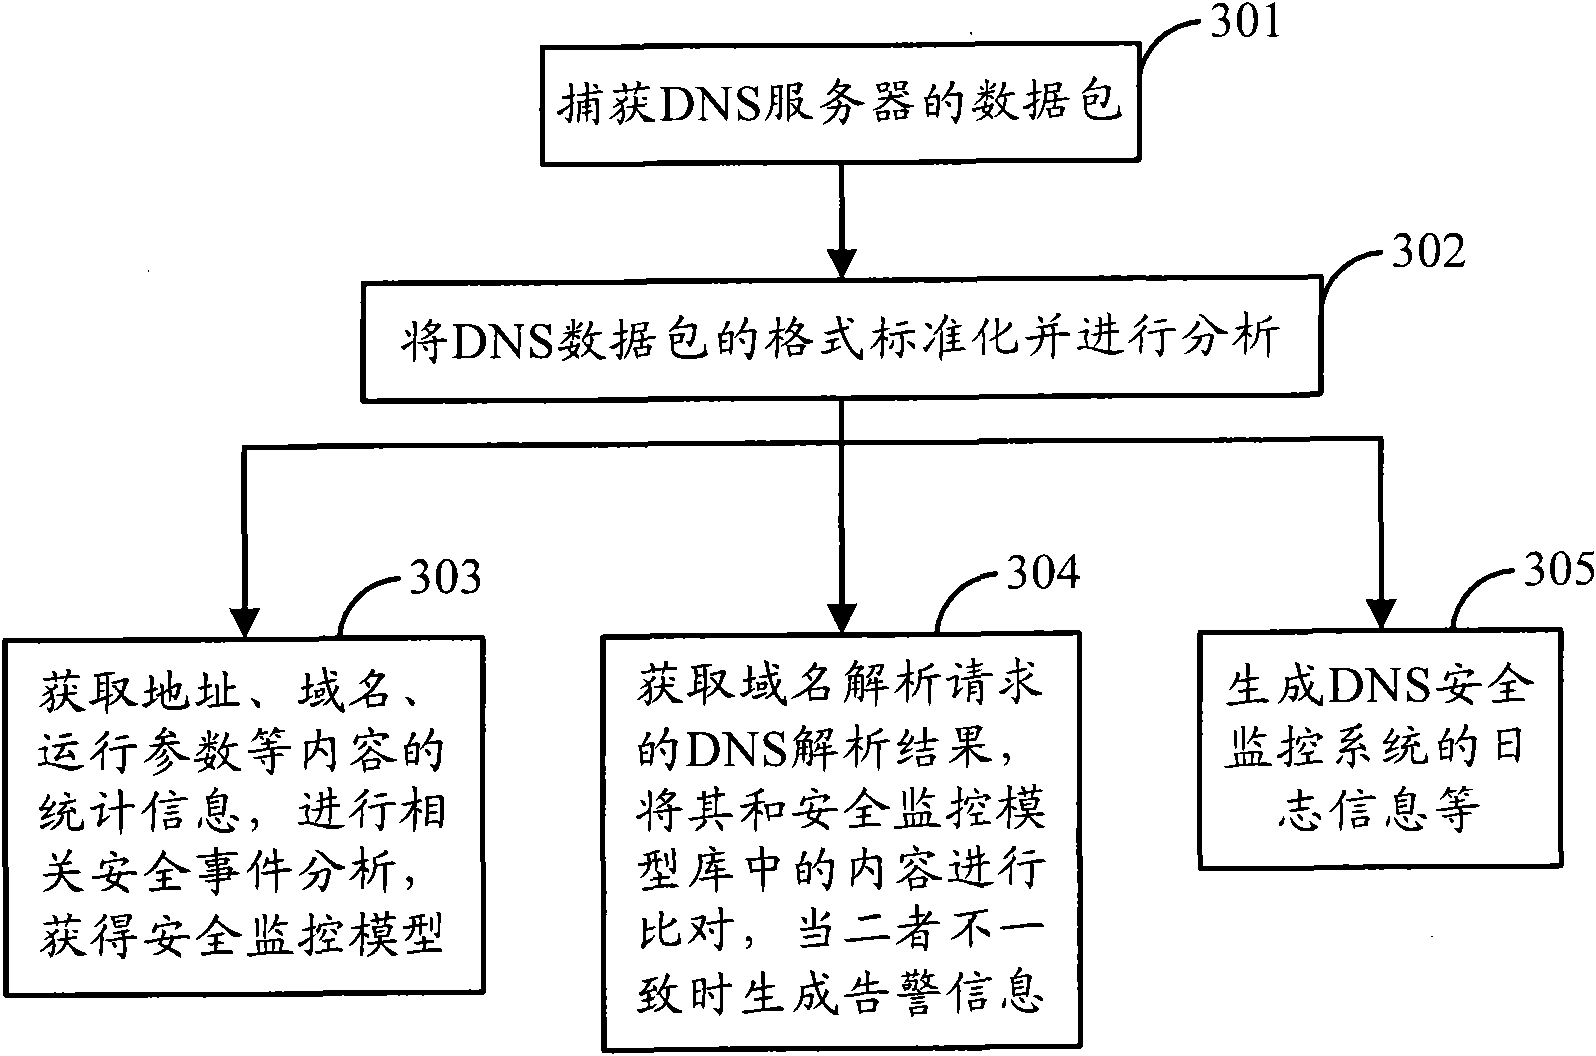 DNS (Domain Name Server) safety monitoring system and method